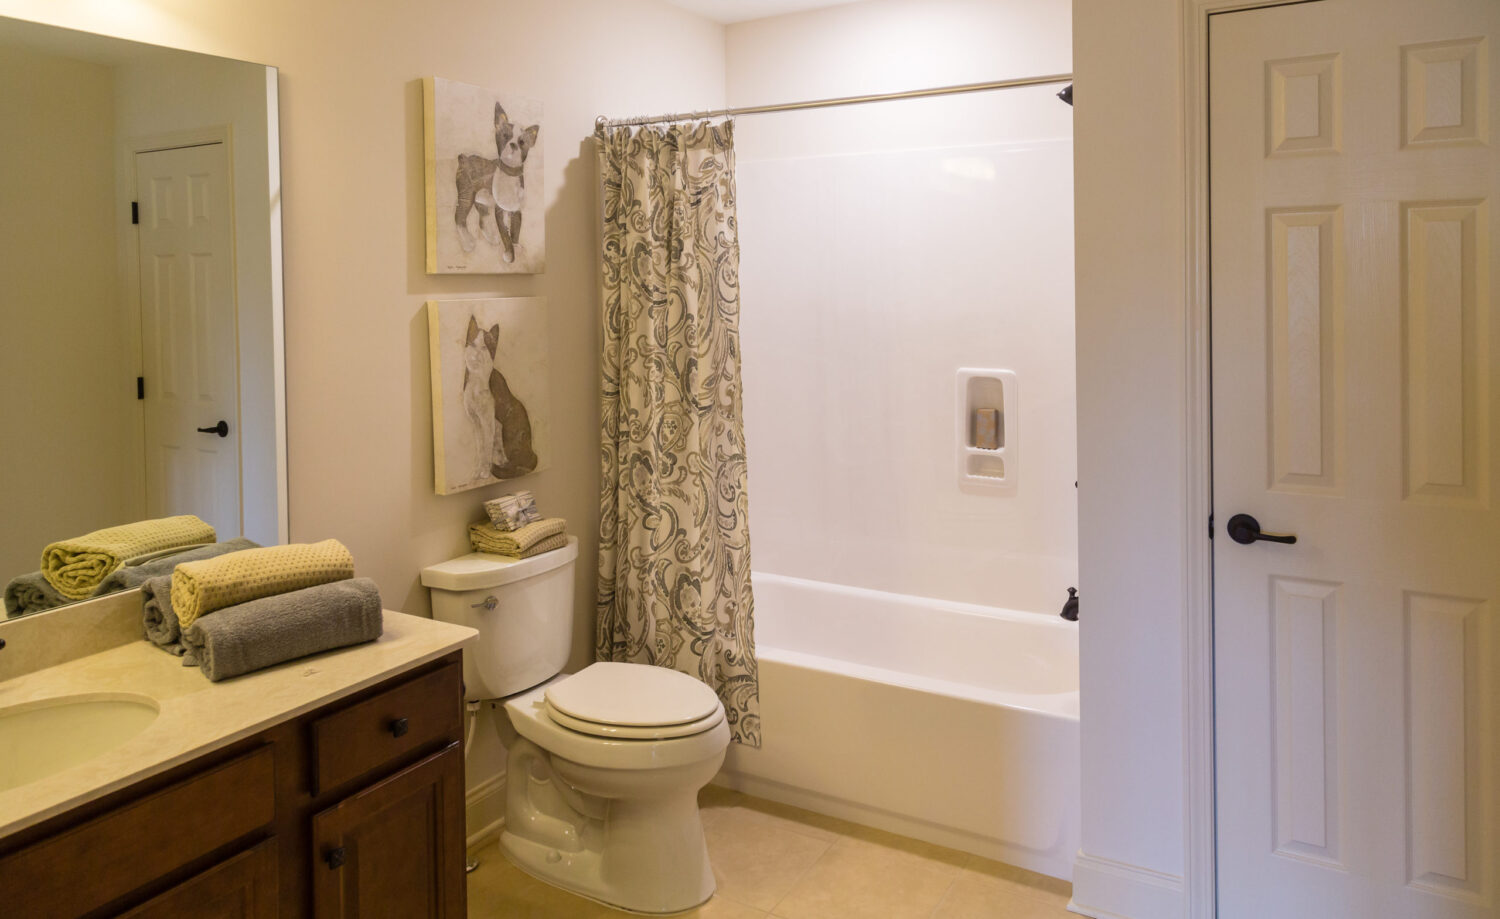 Bathroom Plumbing Services in SF